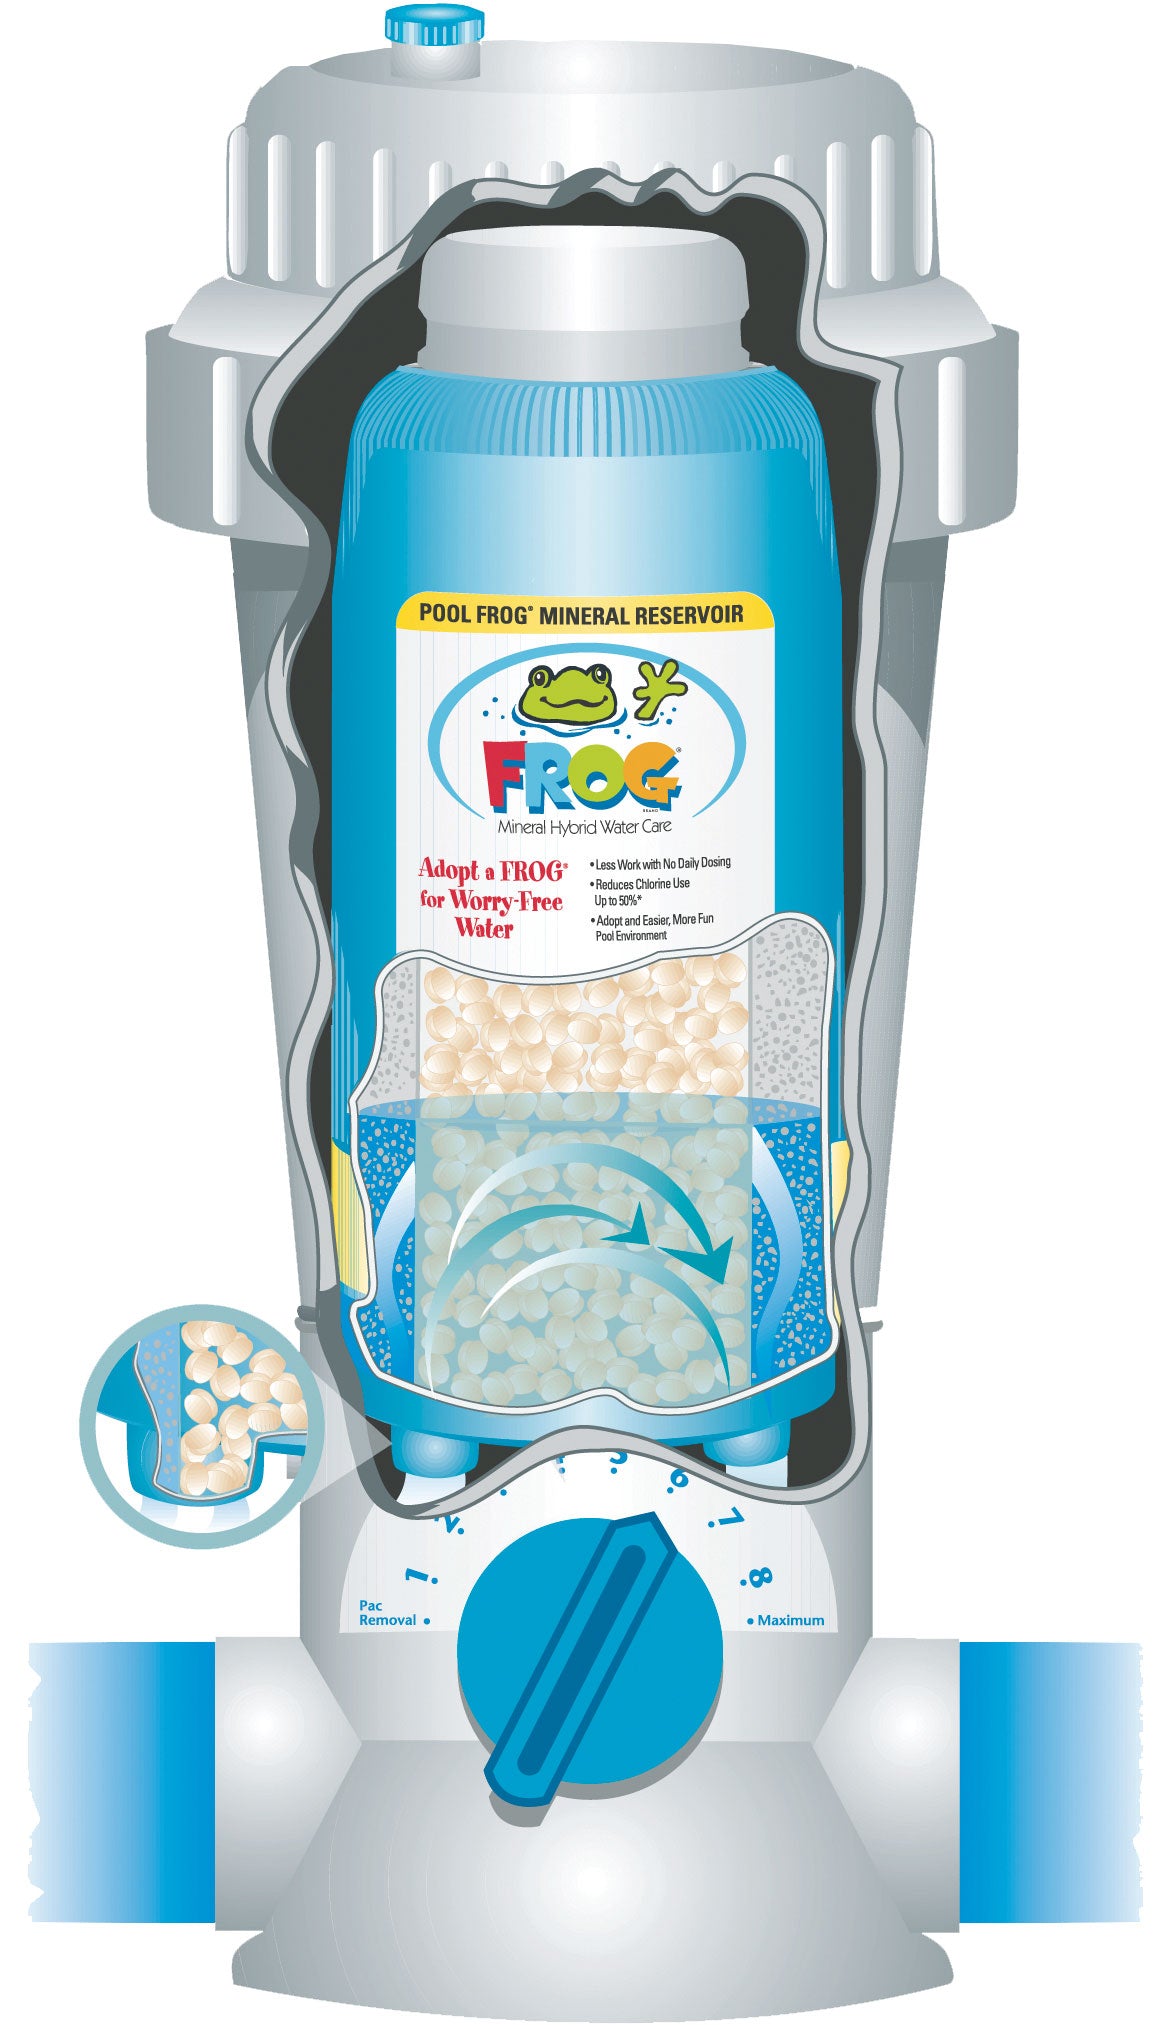 Pool Frog 5400 Pool Mineral System for Pools up to 40,000 gallons